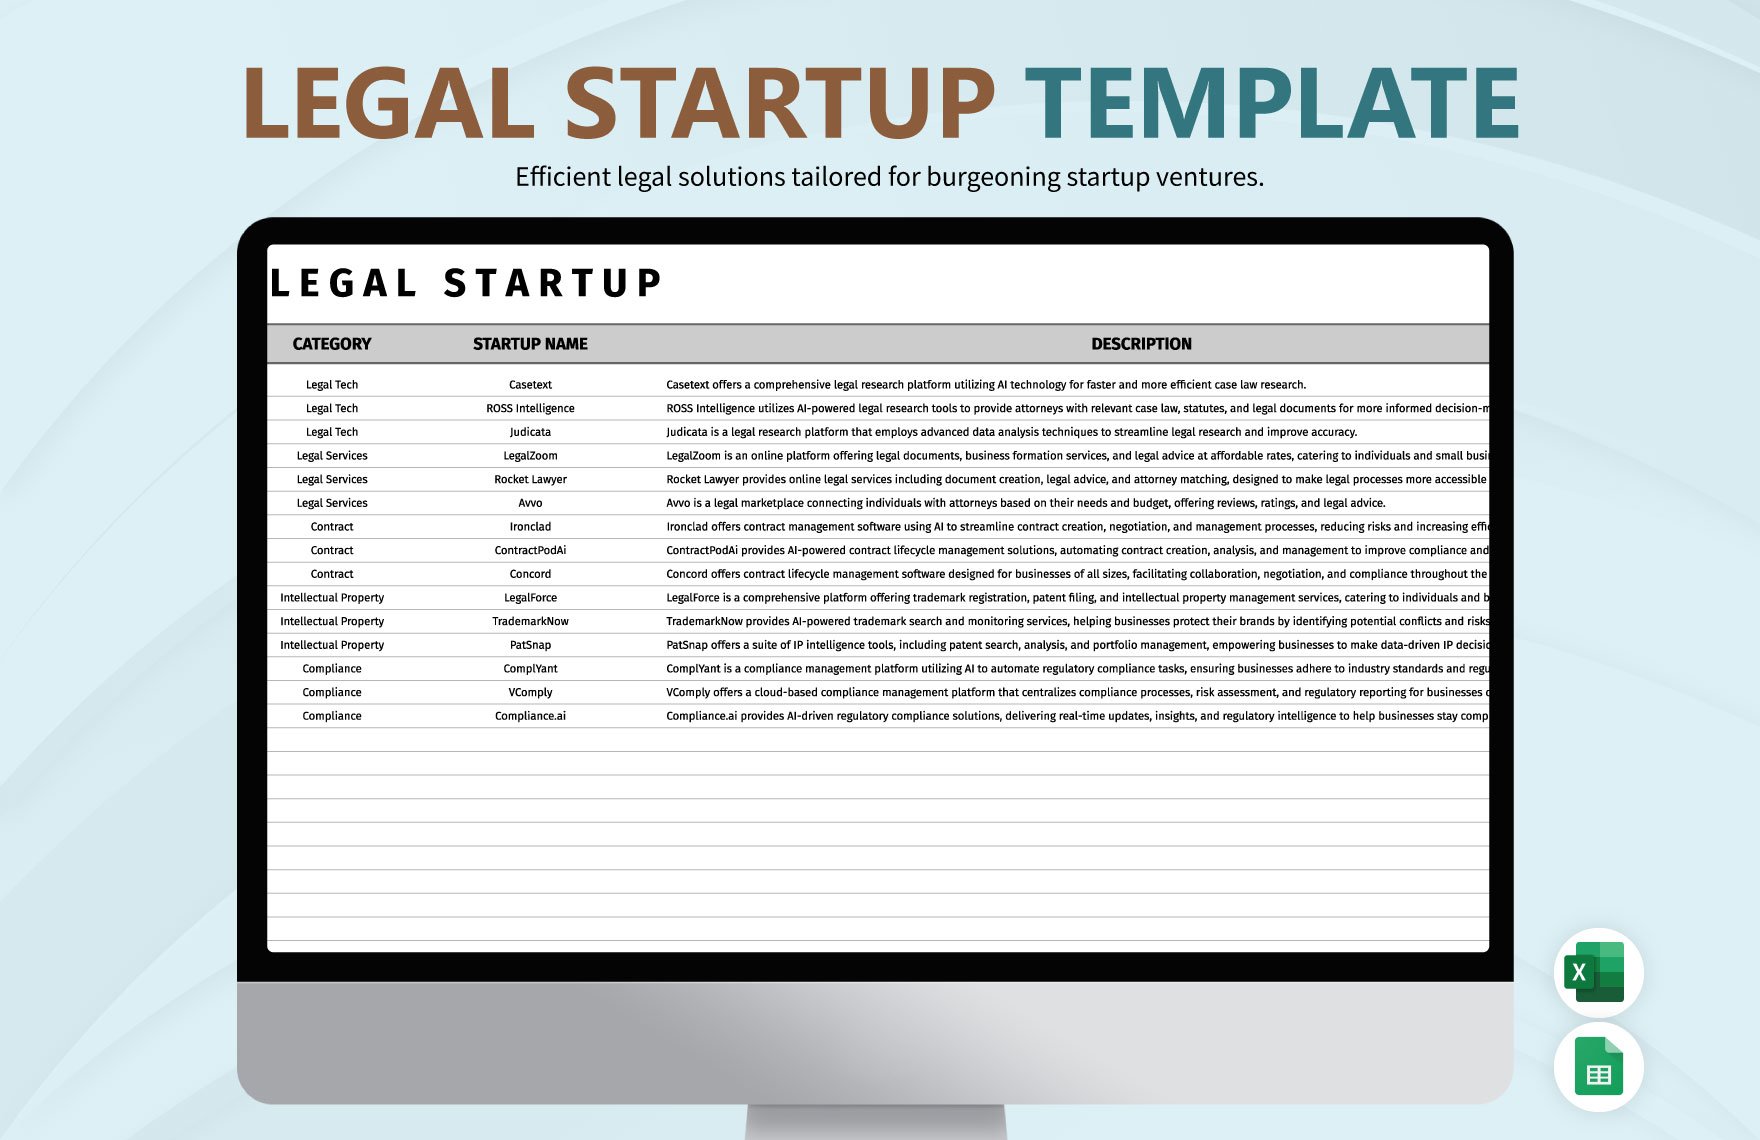 Legal Startup Template in Excel, Google Sheets